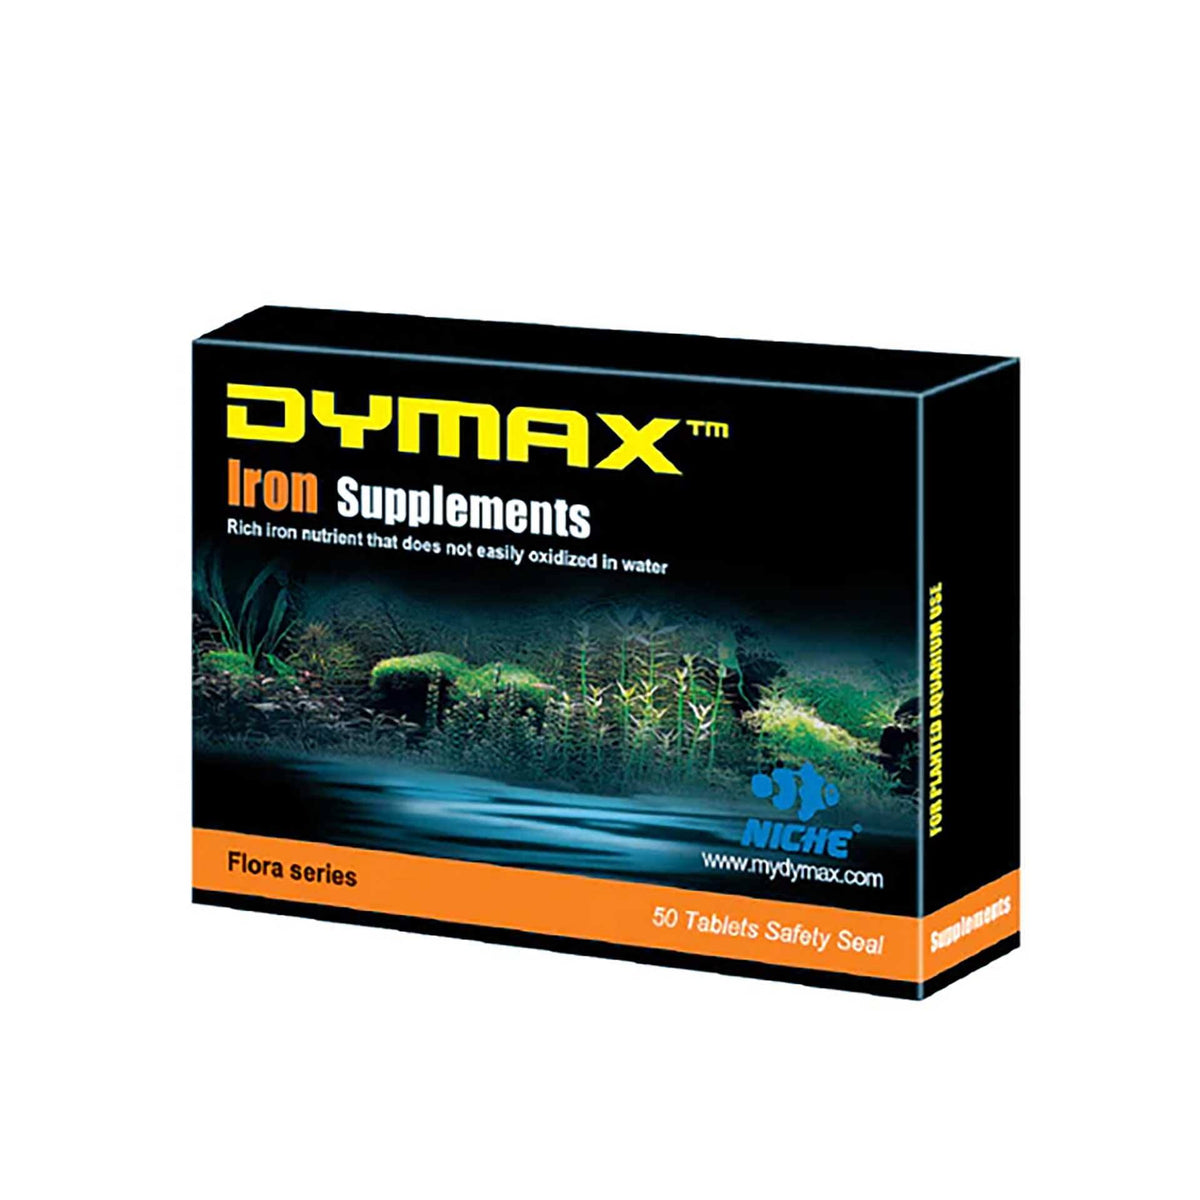 Dymax Iron Supplements 50 Tablets